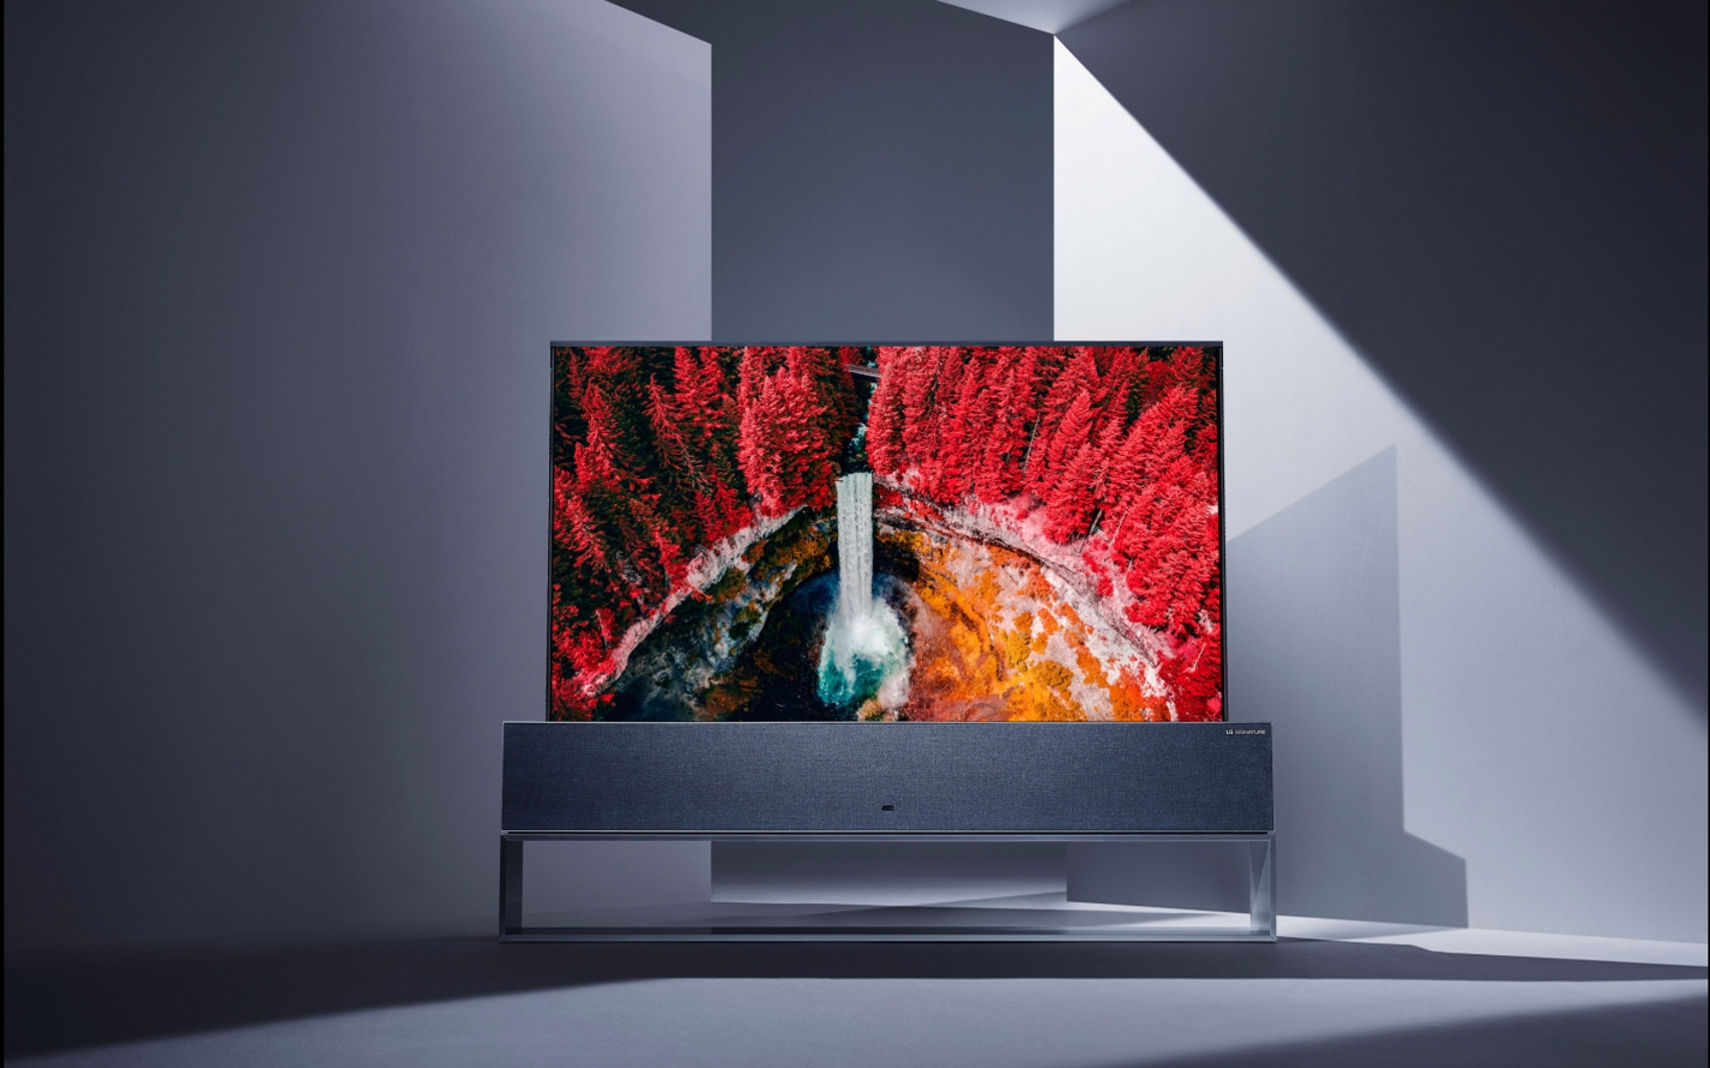 LG Signature R9 Rollable 4K Oled TV